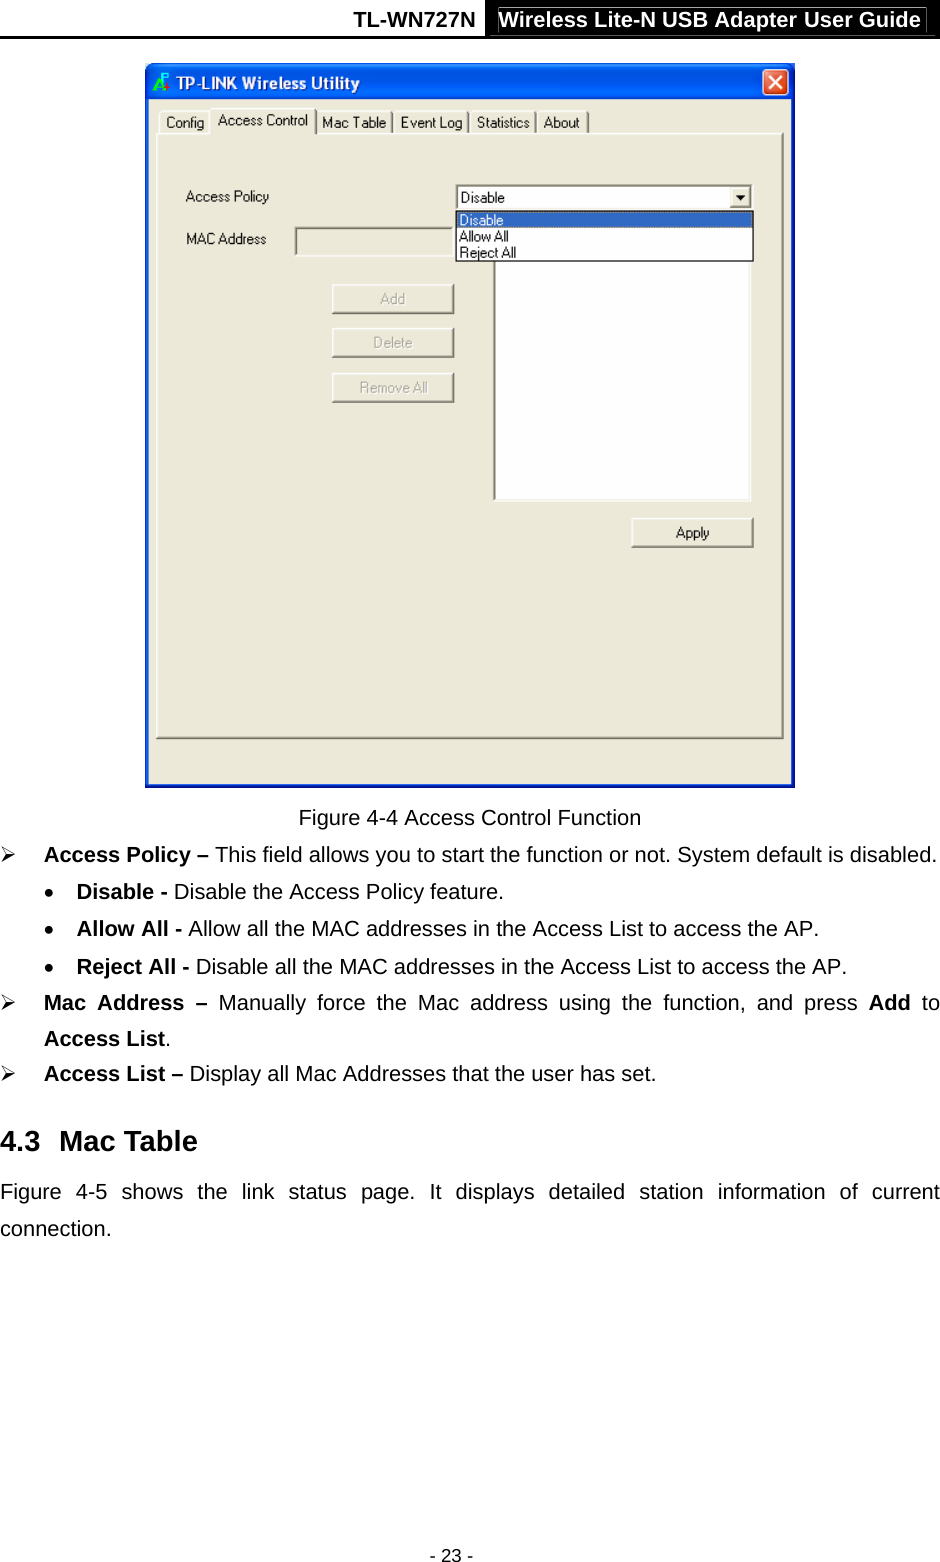 TL-WN727N Wireless Lite-N USB Adapter User Guide - 23 -  Figure 4-4 Access Control Function ¾ Access Policy – This field allows you to start the function or not. System default is disabled. • Disable - Disable the Access Policy feature. • Allow All - Allow all the MAC addresses in the Access List to access the AP. • Reject All - Disable all the MAC addresses in the Access List to access the AP. ¾ Mac Address – Manually force the Mac address using the function, and press Add to Access List. ¾ Access List – Display all Mac Addresses that the user has set. 4.3  Mac Table Figure 4-5 shows the link status page. It displays detailed station information of current connection. 